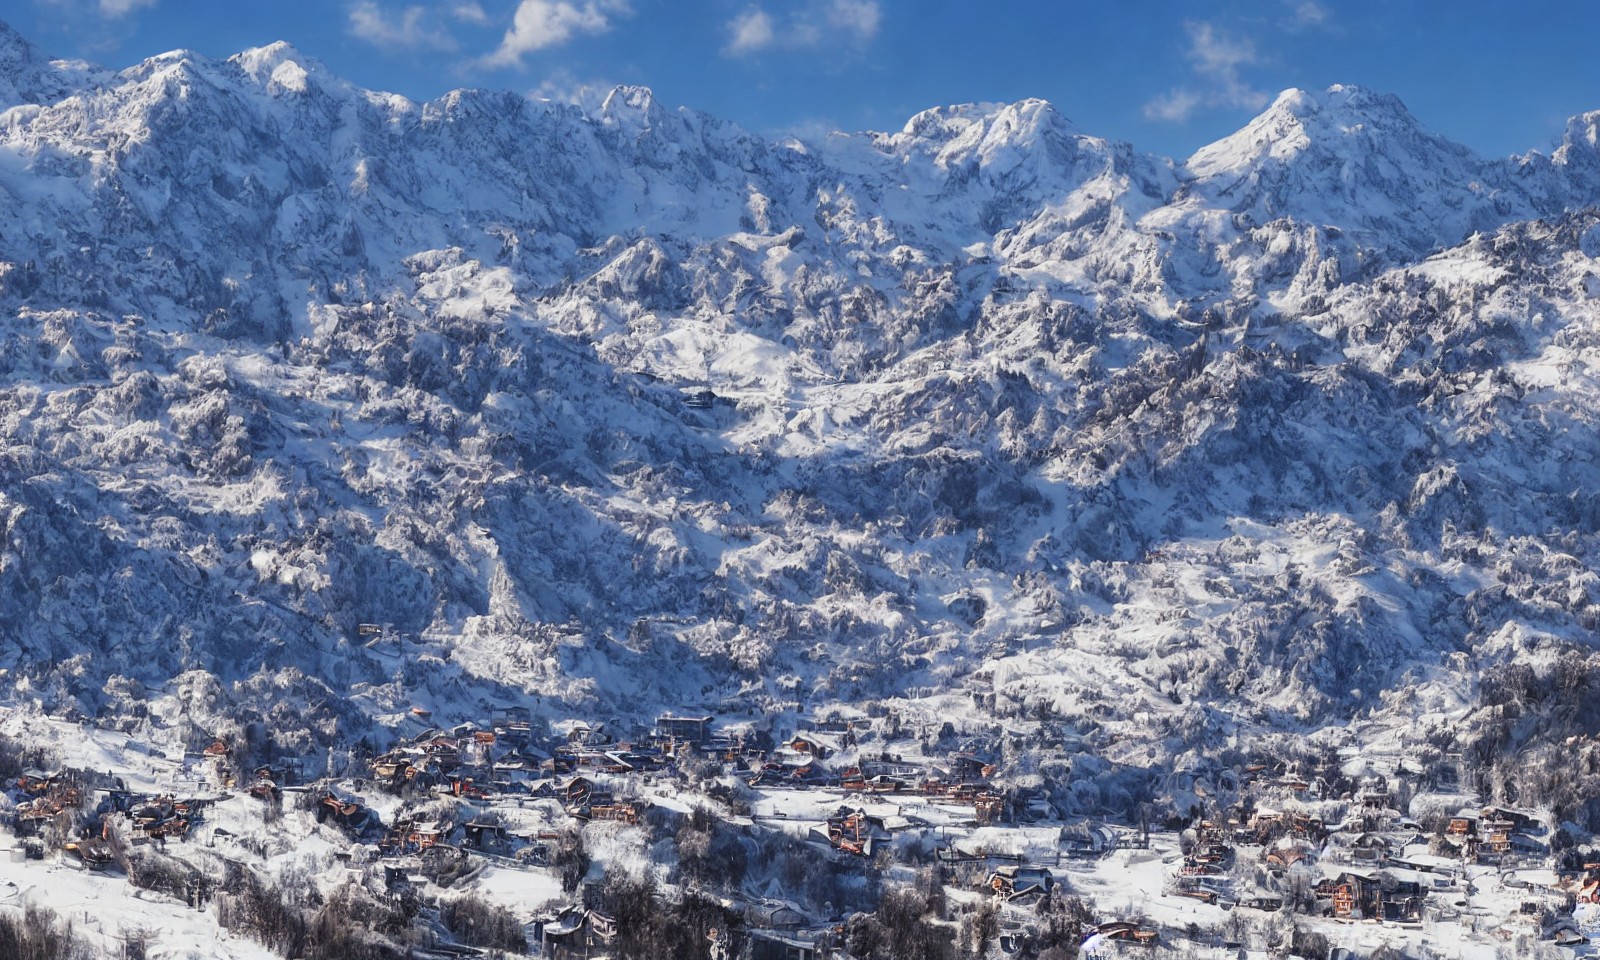 Spectacular small villages beneath high snow-capped mountains